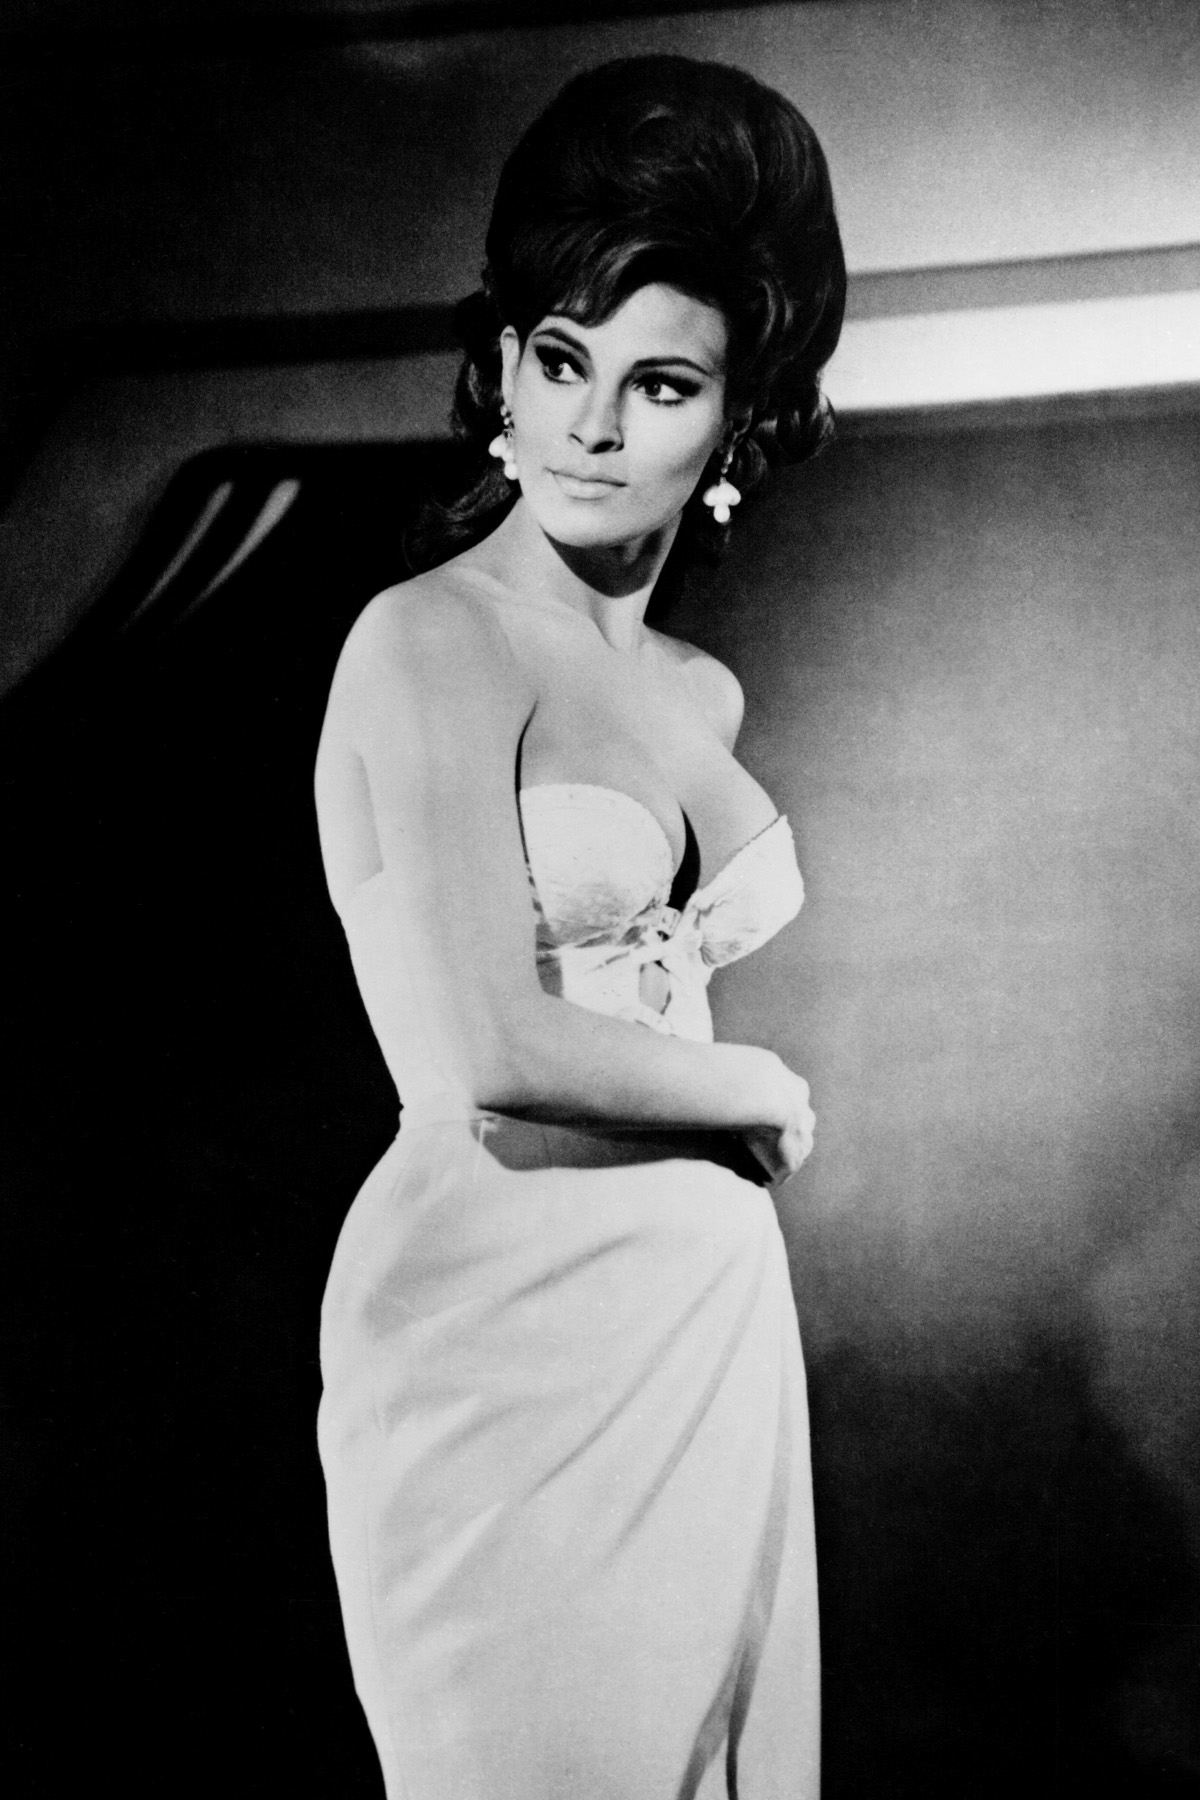 Raquel Welch wearing a strapless dress, circa 1965. | Source: Getty Images